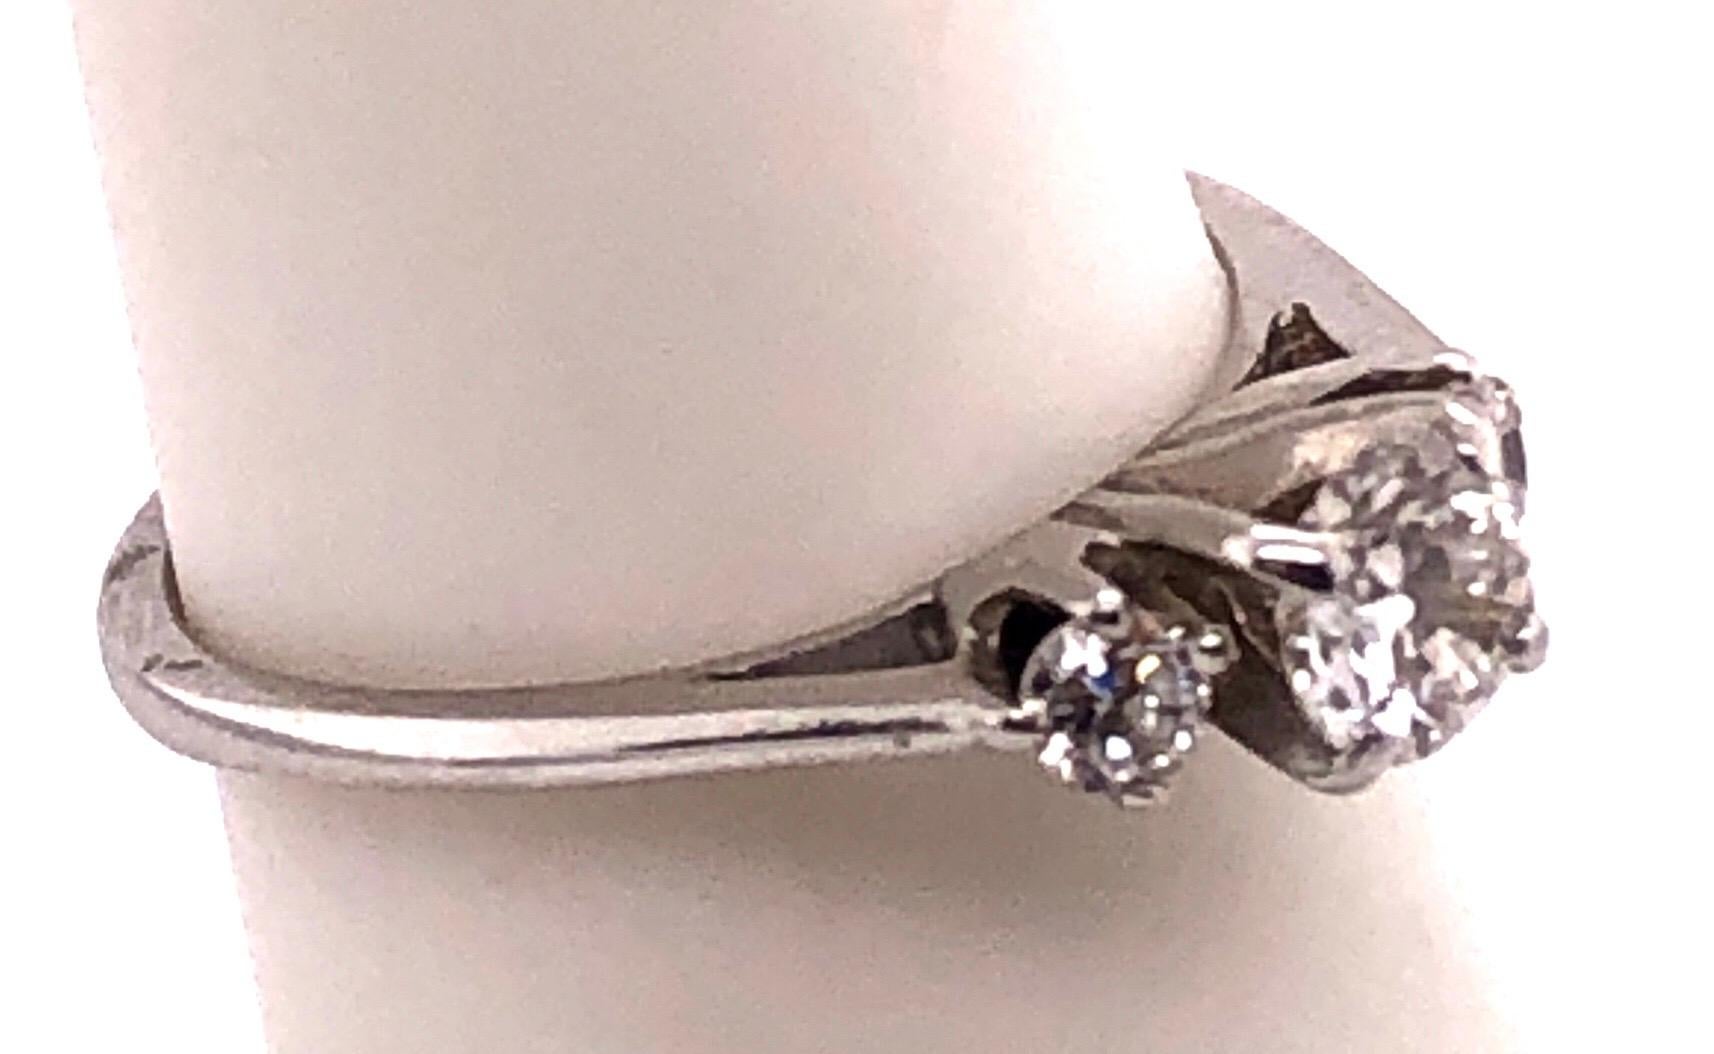 14Kt White Gold Engagement Ring 0.64 Total Diamond Weight.
Size 5.6 with 1.8 grams total weight.